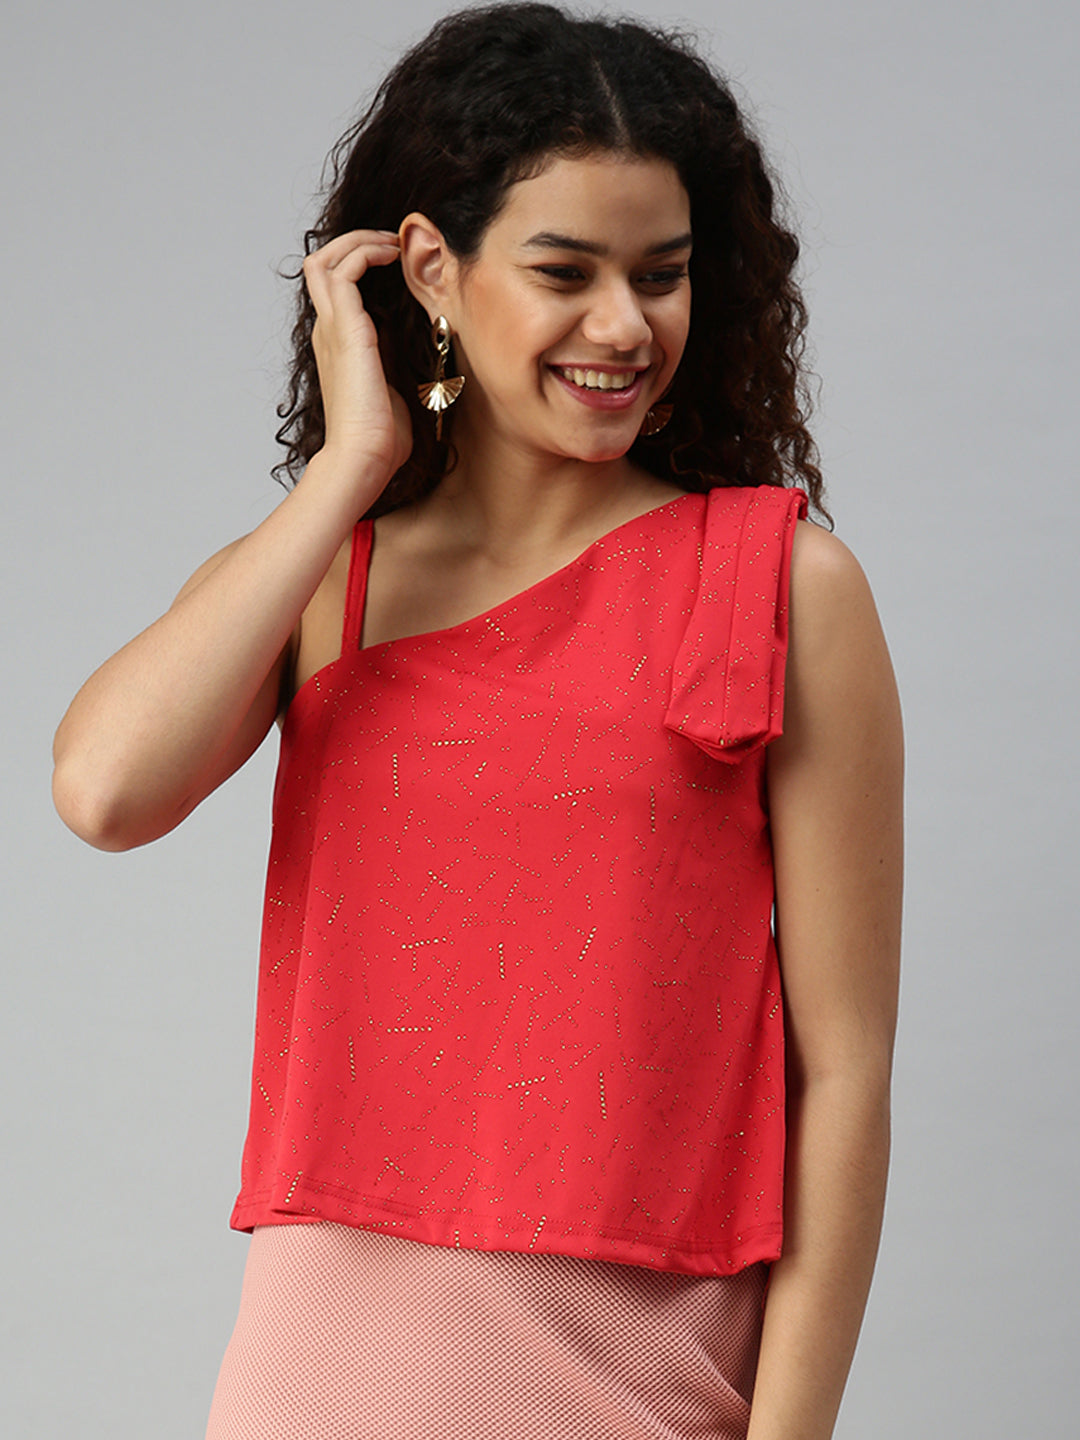 Women's Embellished Red Top